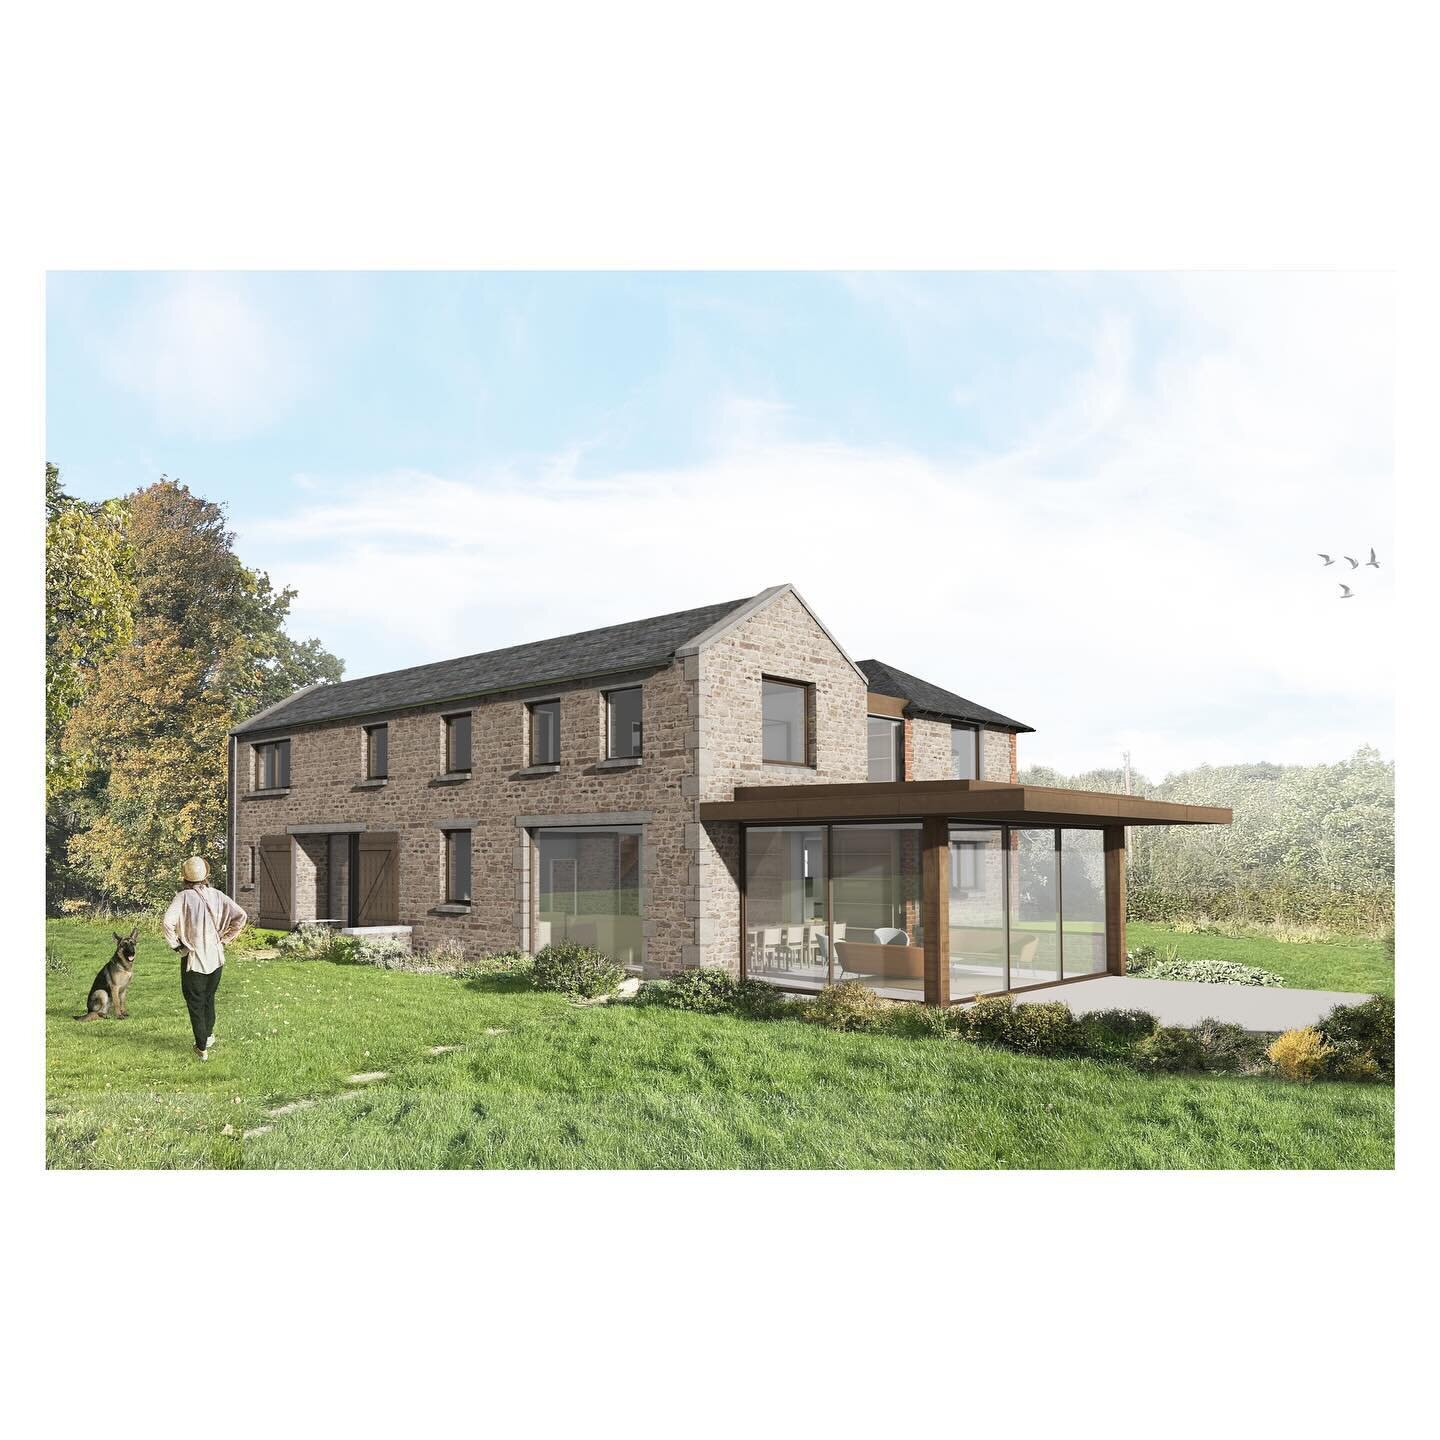 | House in Dorset

We are delighted to have received planning approval for our alteration and substantial addition to an existing cottage in Dorset.

The existing house was formerly two agricultural cottages that were combined in the C20. This will b